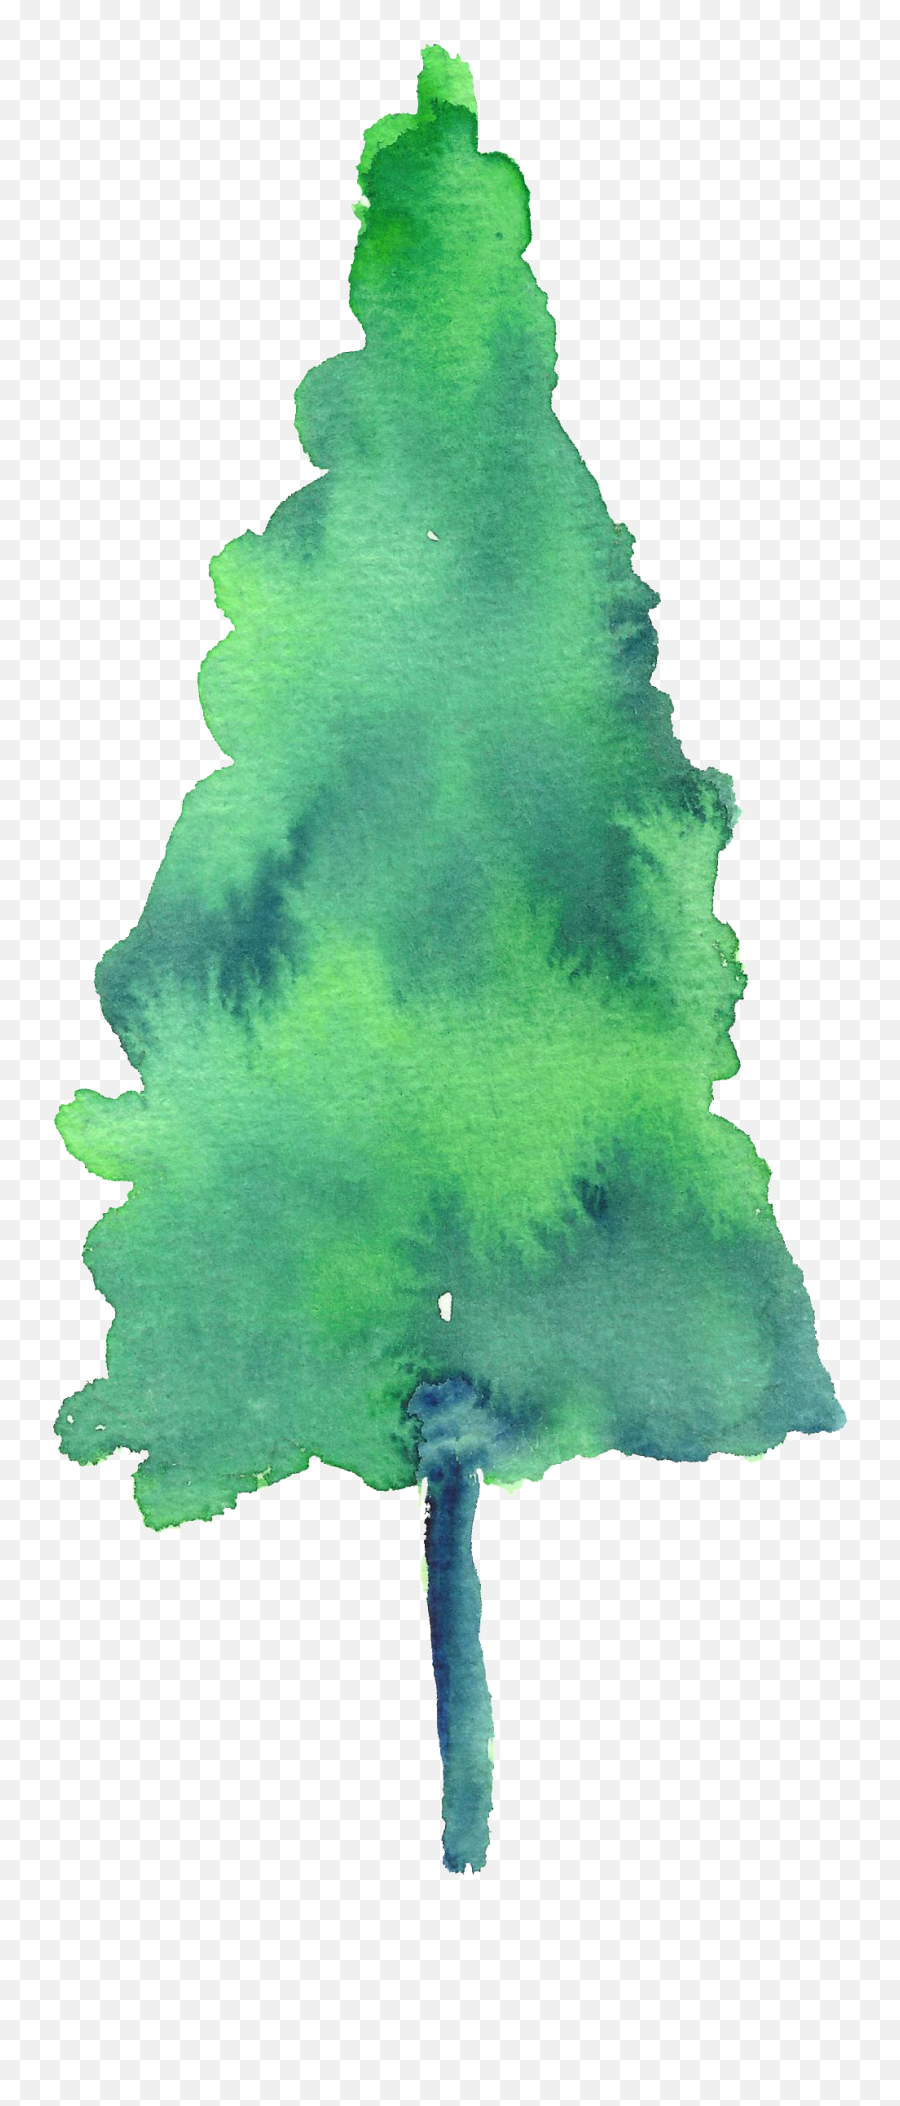 Download Hd Painted Watercolor Pine Tree Decoration Vector - Christmas Tree Png,Watercolor Tree Png